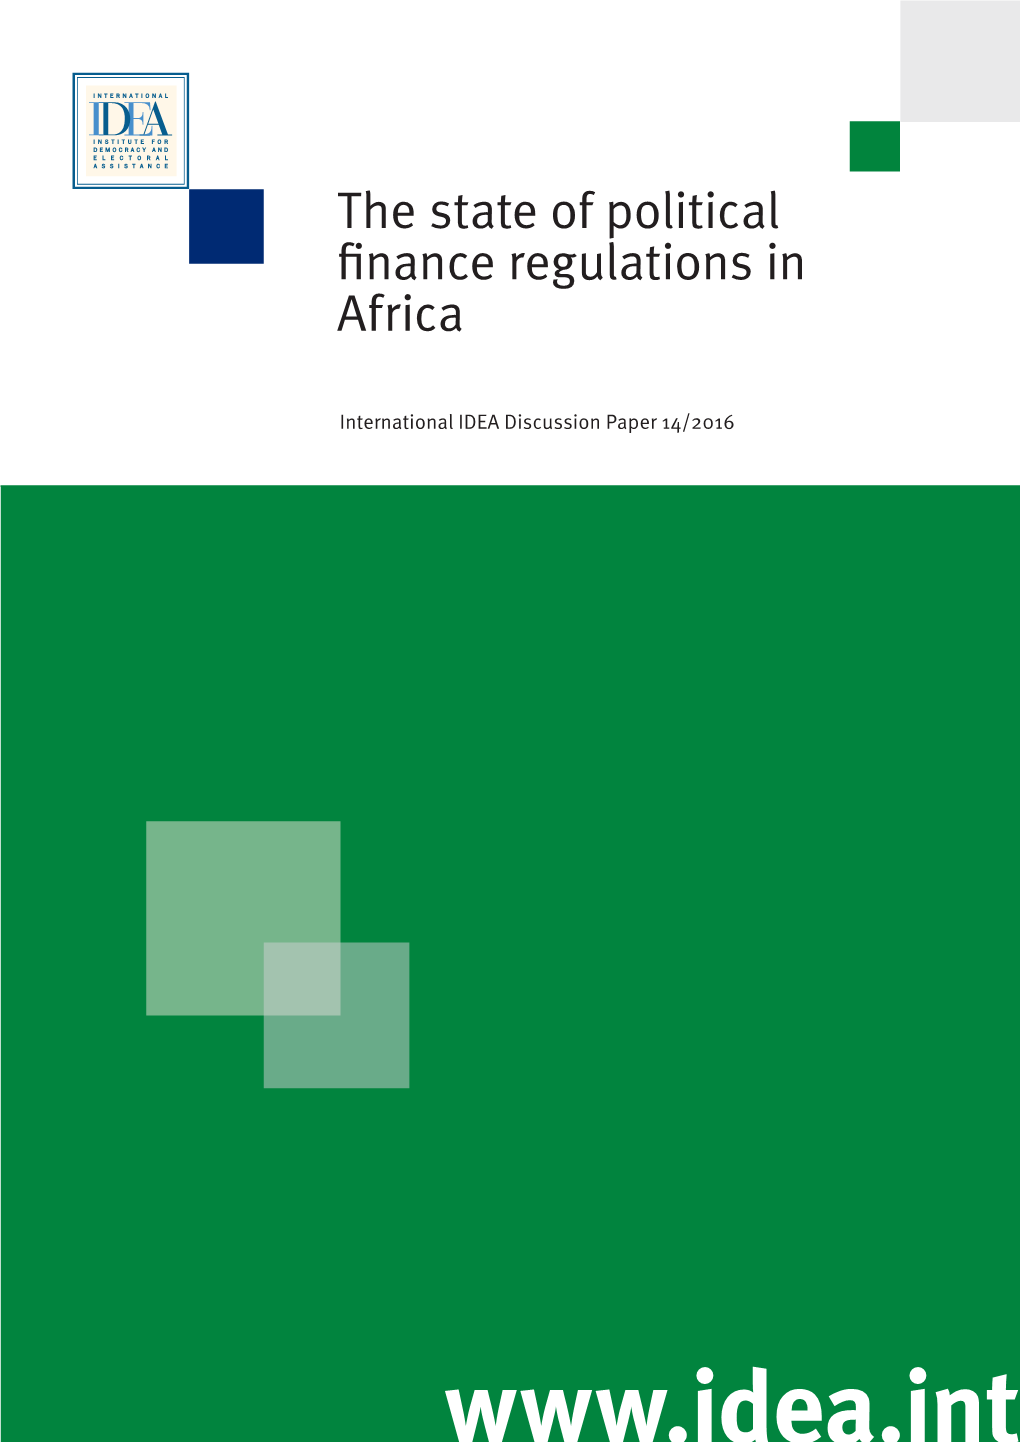 The State of Political Finance Regulations in Africa